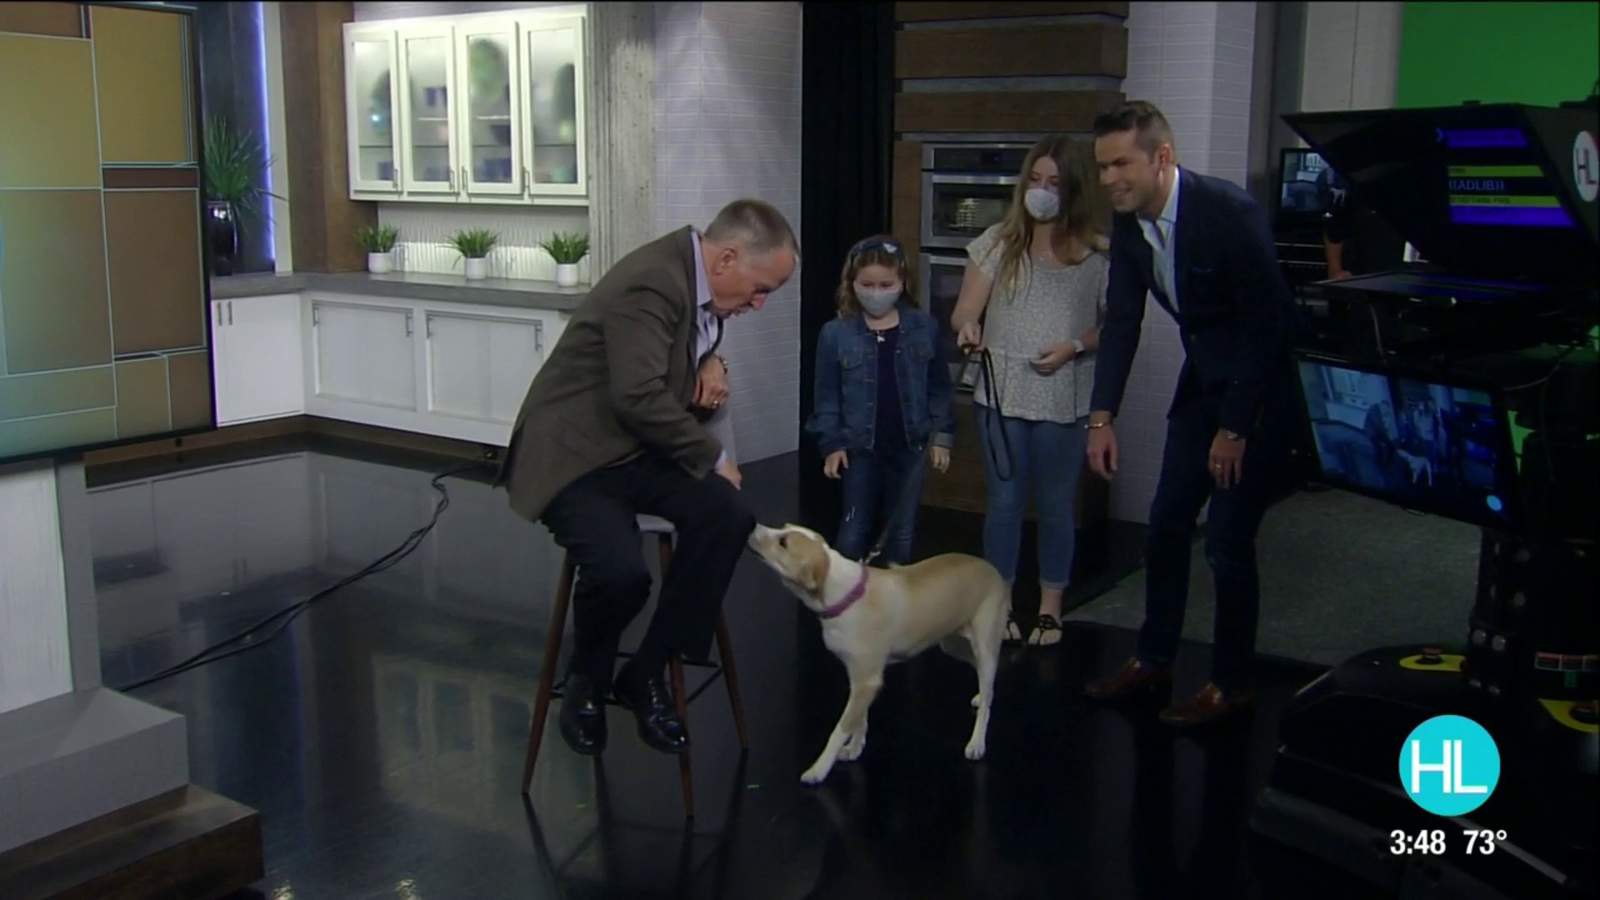 KPRC 2 senior reporter Phil Archer reflects on career and reunites with rescued dog on ‘Houston Life’